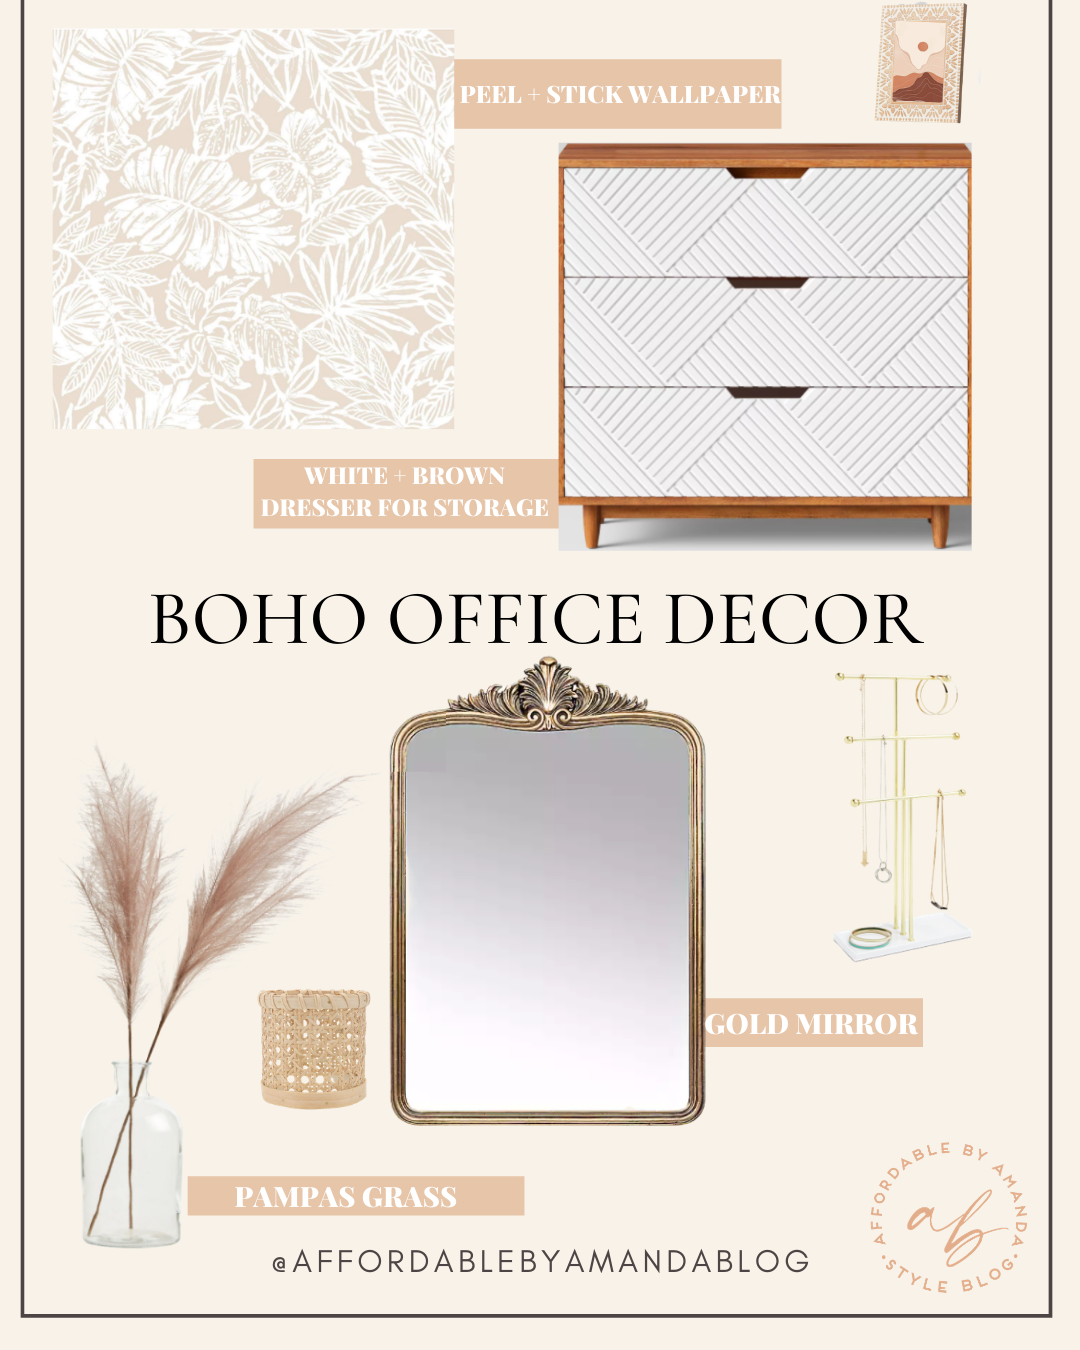 Boho Office Decor - Updates to My Boho Home Office - Affordable by Amanda